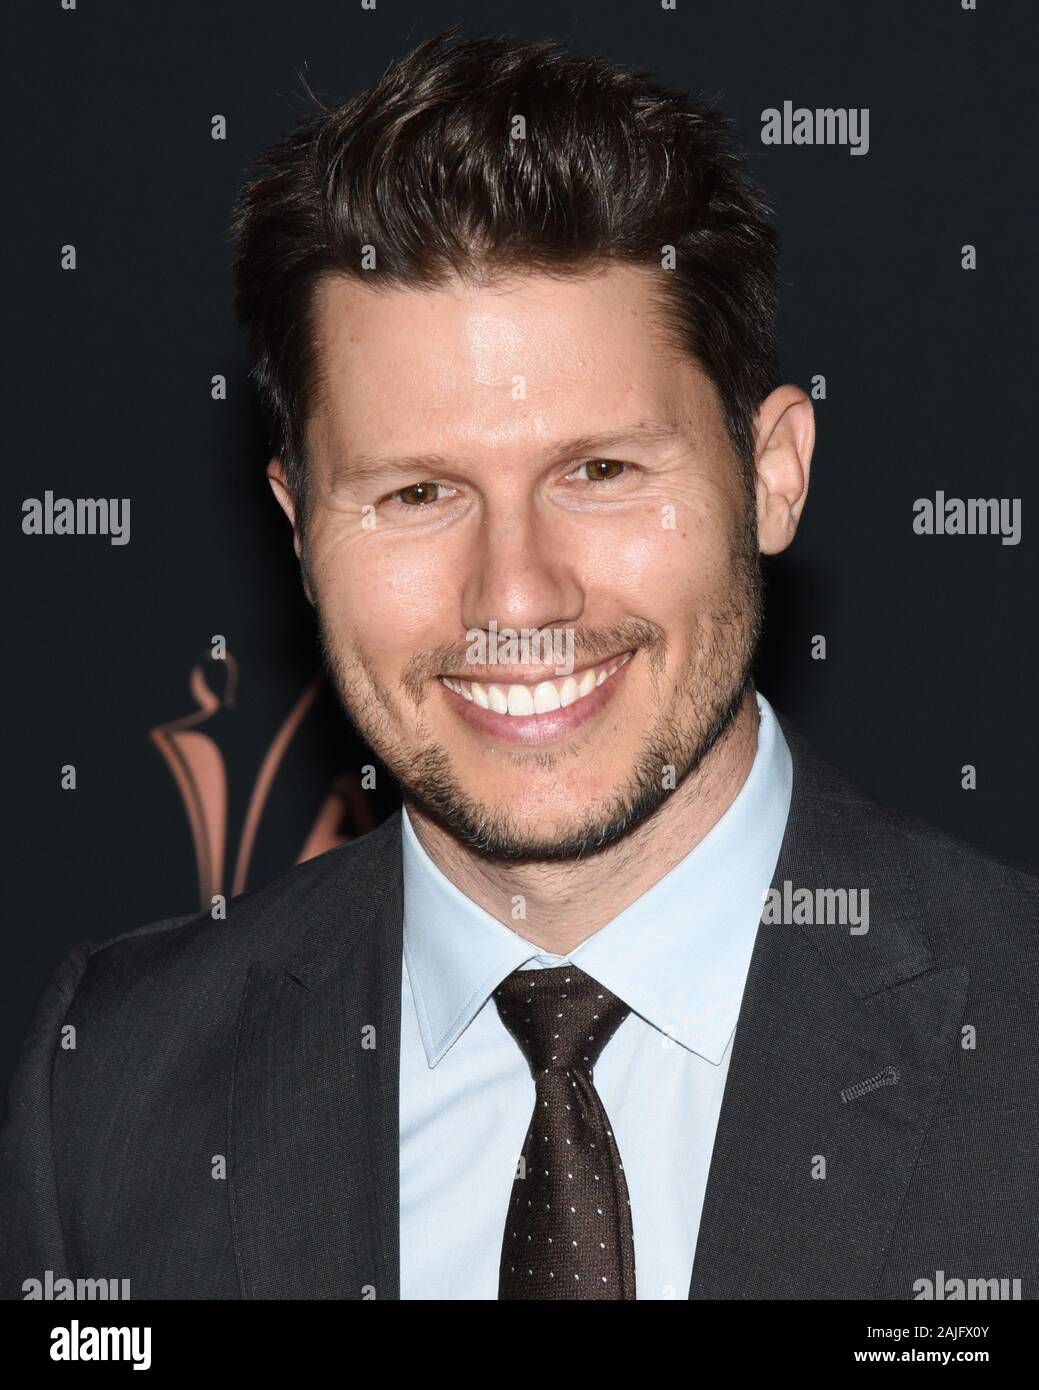 January 3, 2020, West Hollywood, California, USA: Jason Dundas attends at the 9th Annual Australian Academy Of Cinema And Television Arts (AACTA) International Awards. (Credit Image: © Billy Bennight/ZUMA Wire) Stock Photo